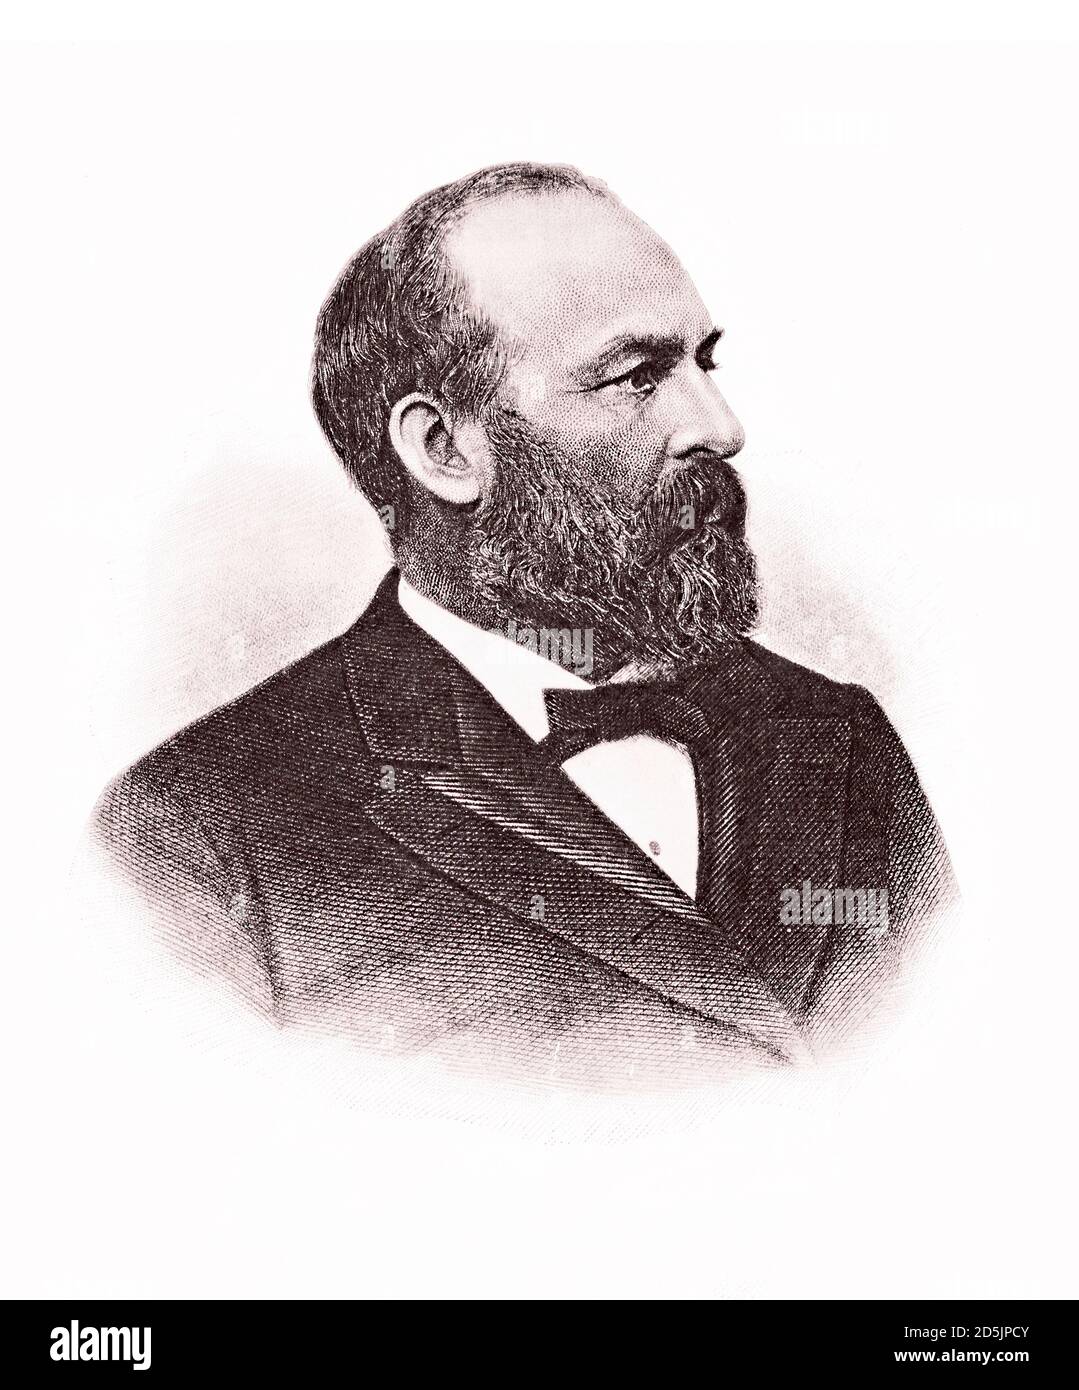 Portrait of president James A. Garfield. James Abram Garfield (1831 – 1881) was the 20th president of the United States, serving from March 4, 1881, u Stock Photo